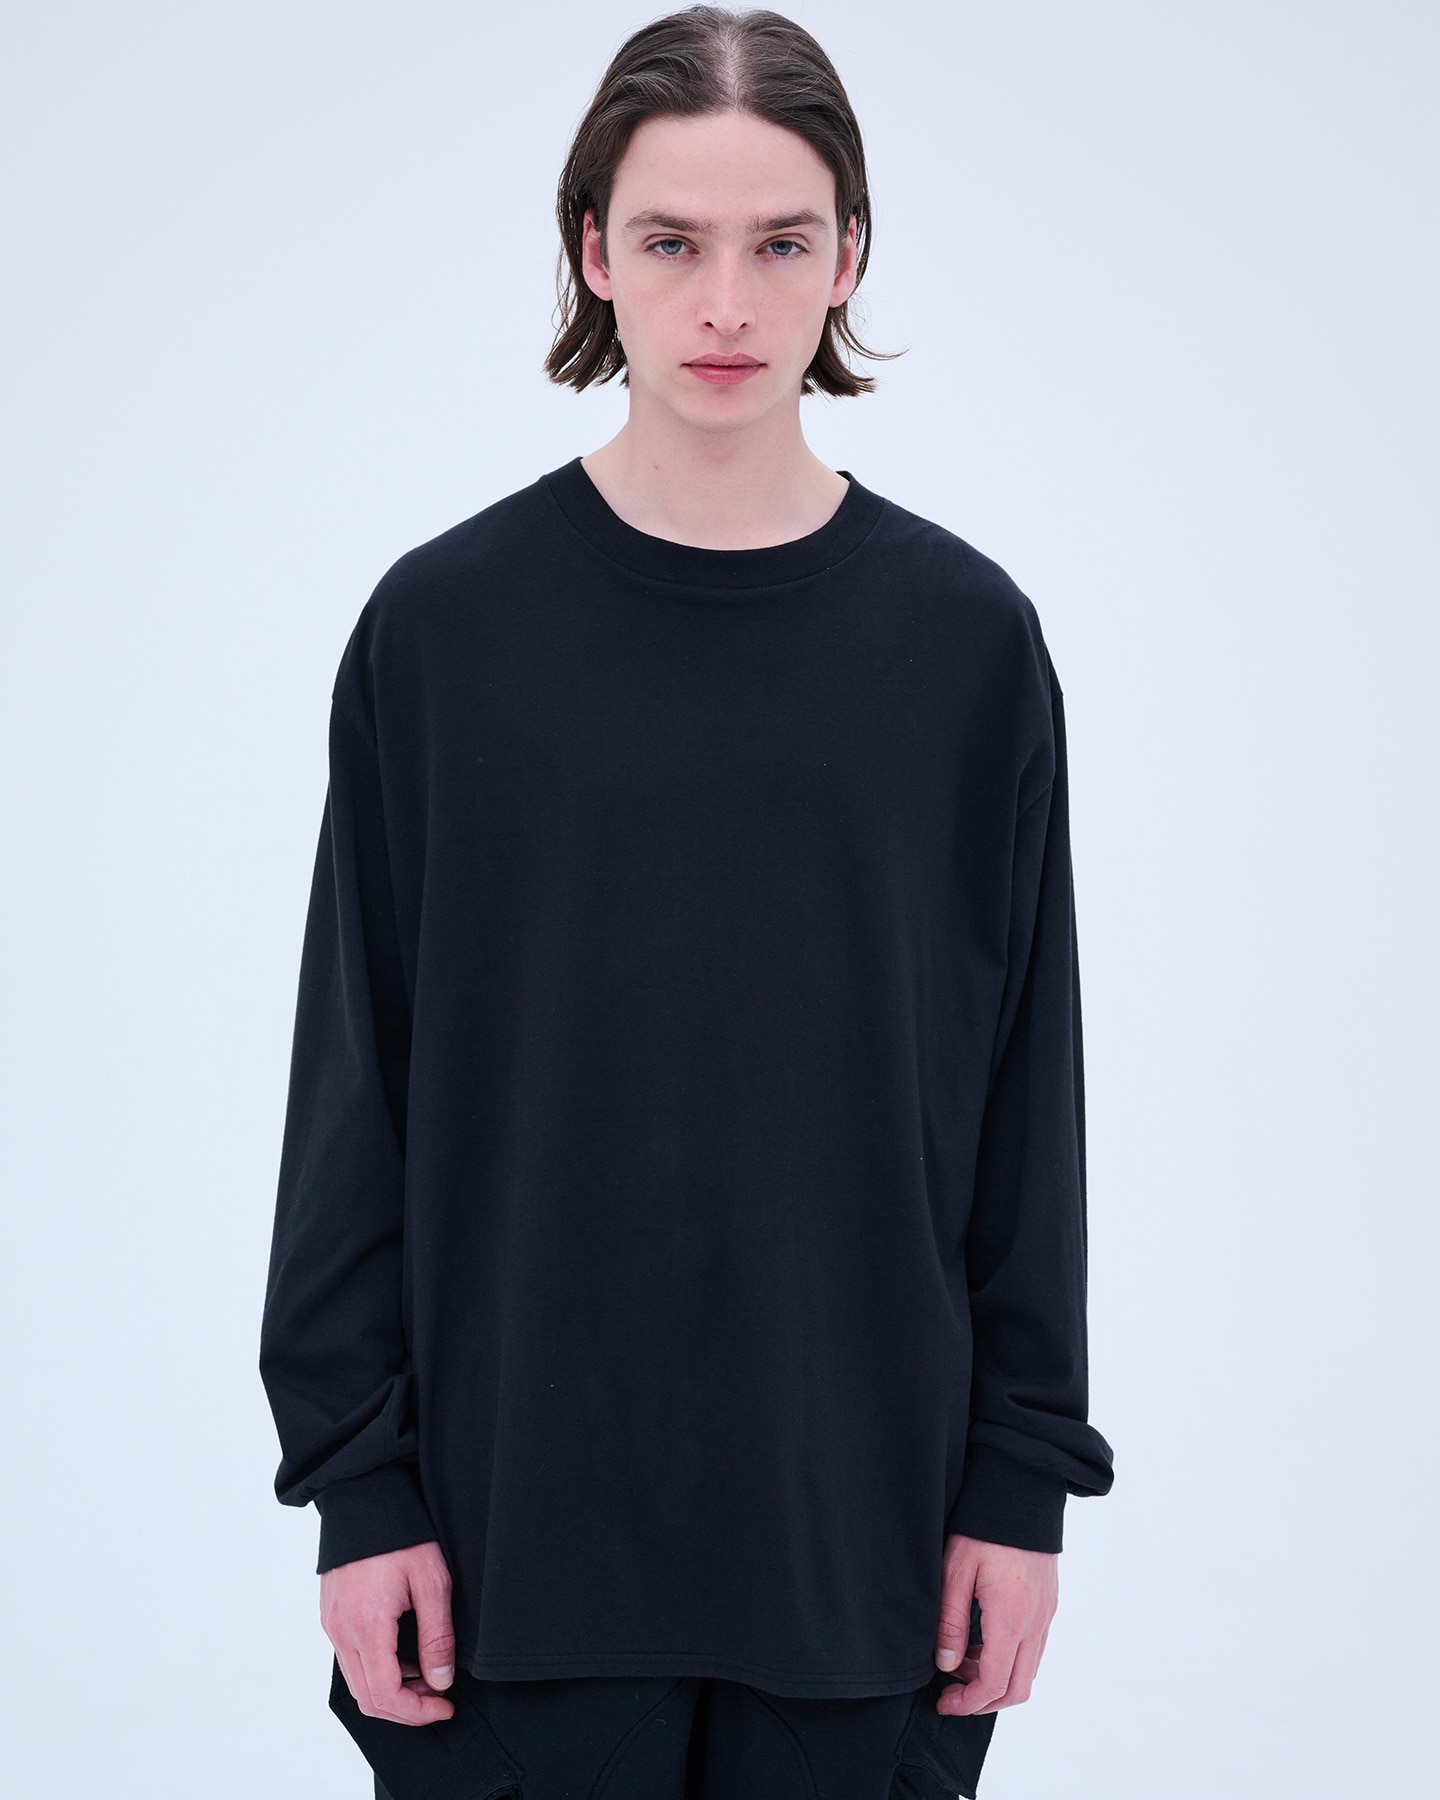 SOPH. | SUPIMA CASHMERE L/S BAGGY TEE(M BLACK):